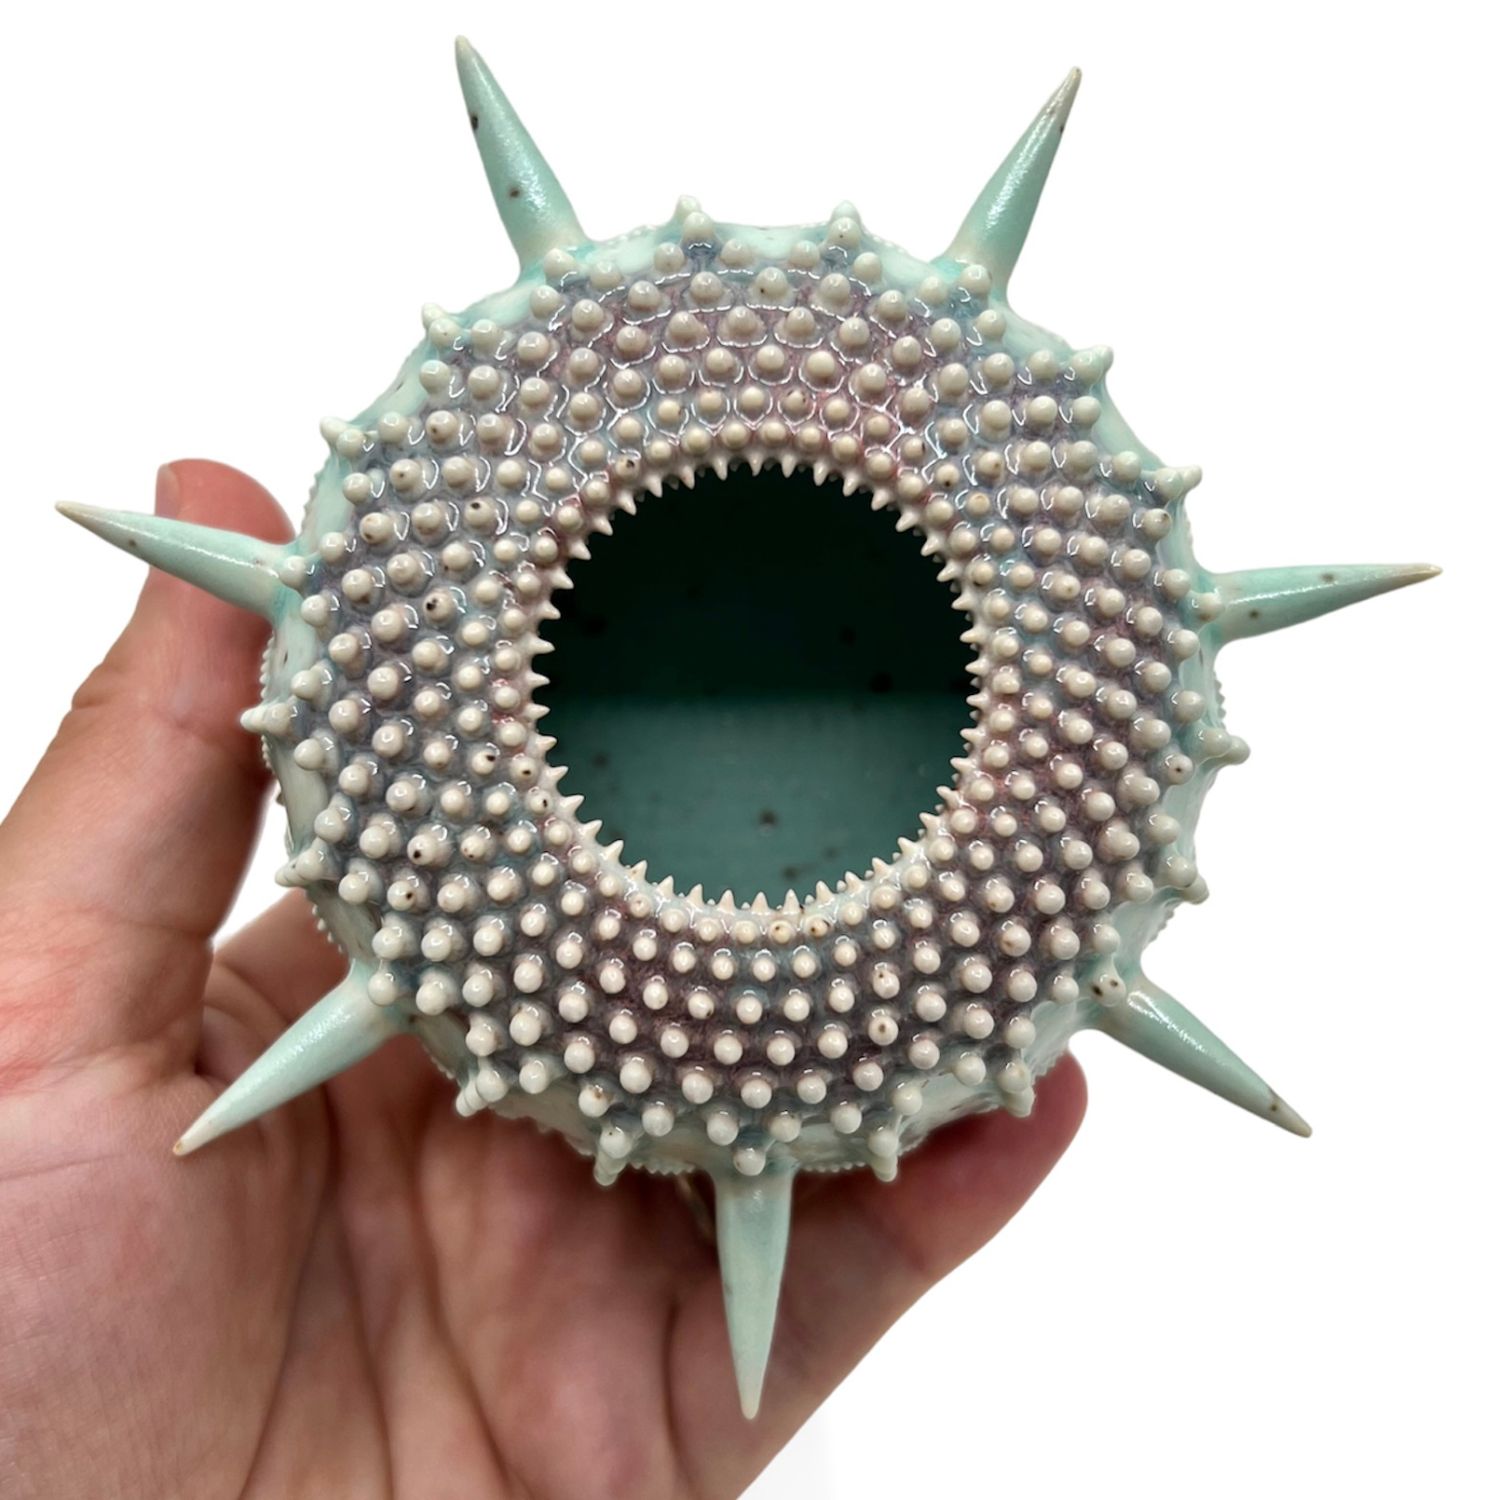 Zara Gardner: Turquoise Sculpture with Spikes Product Image 6 of 6